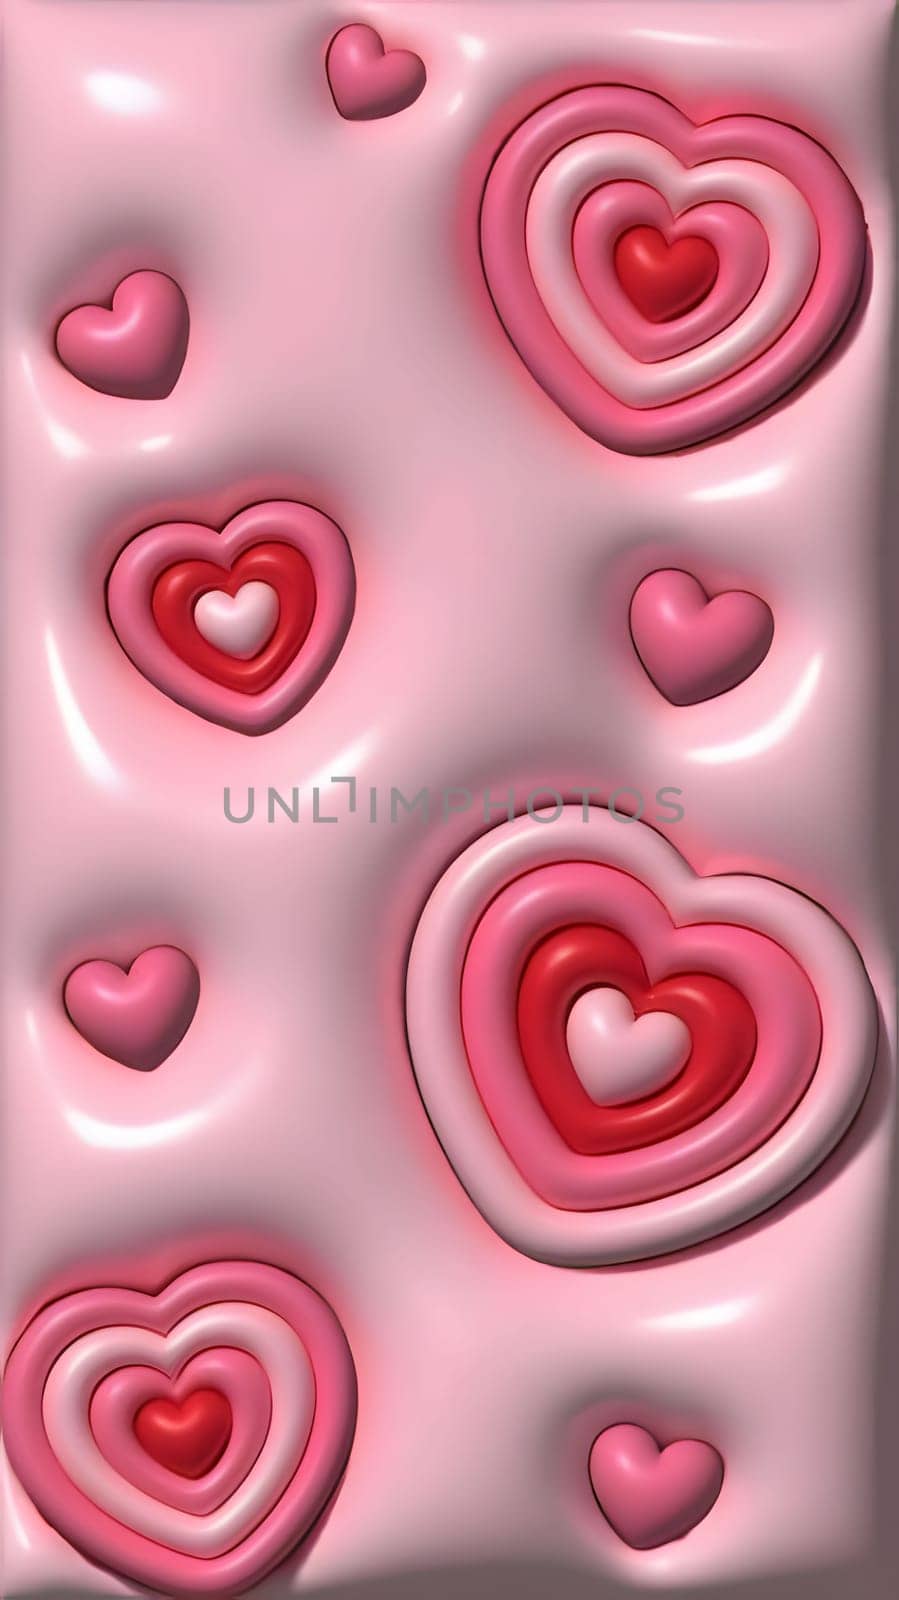 Pink hearts with contour levels on a pink 3D background. Heart as a symbol of affection and love. The time of falling in love and love.